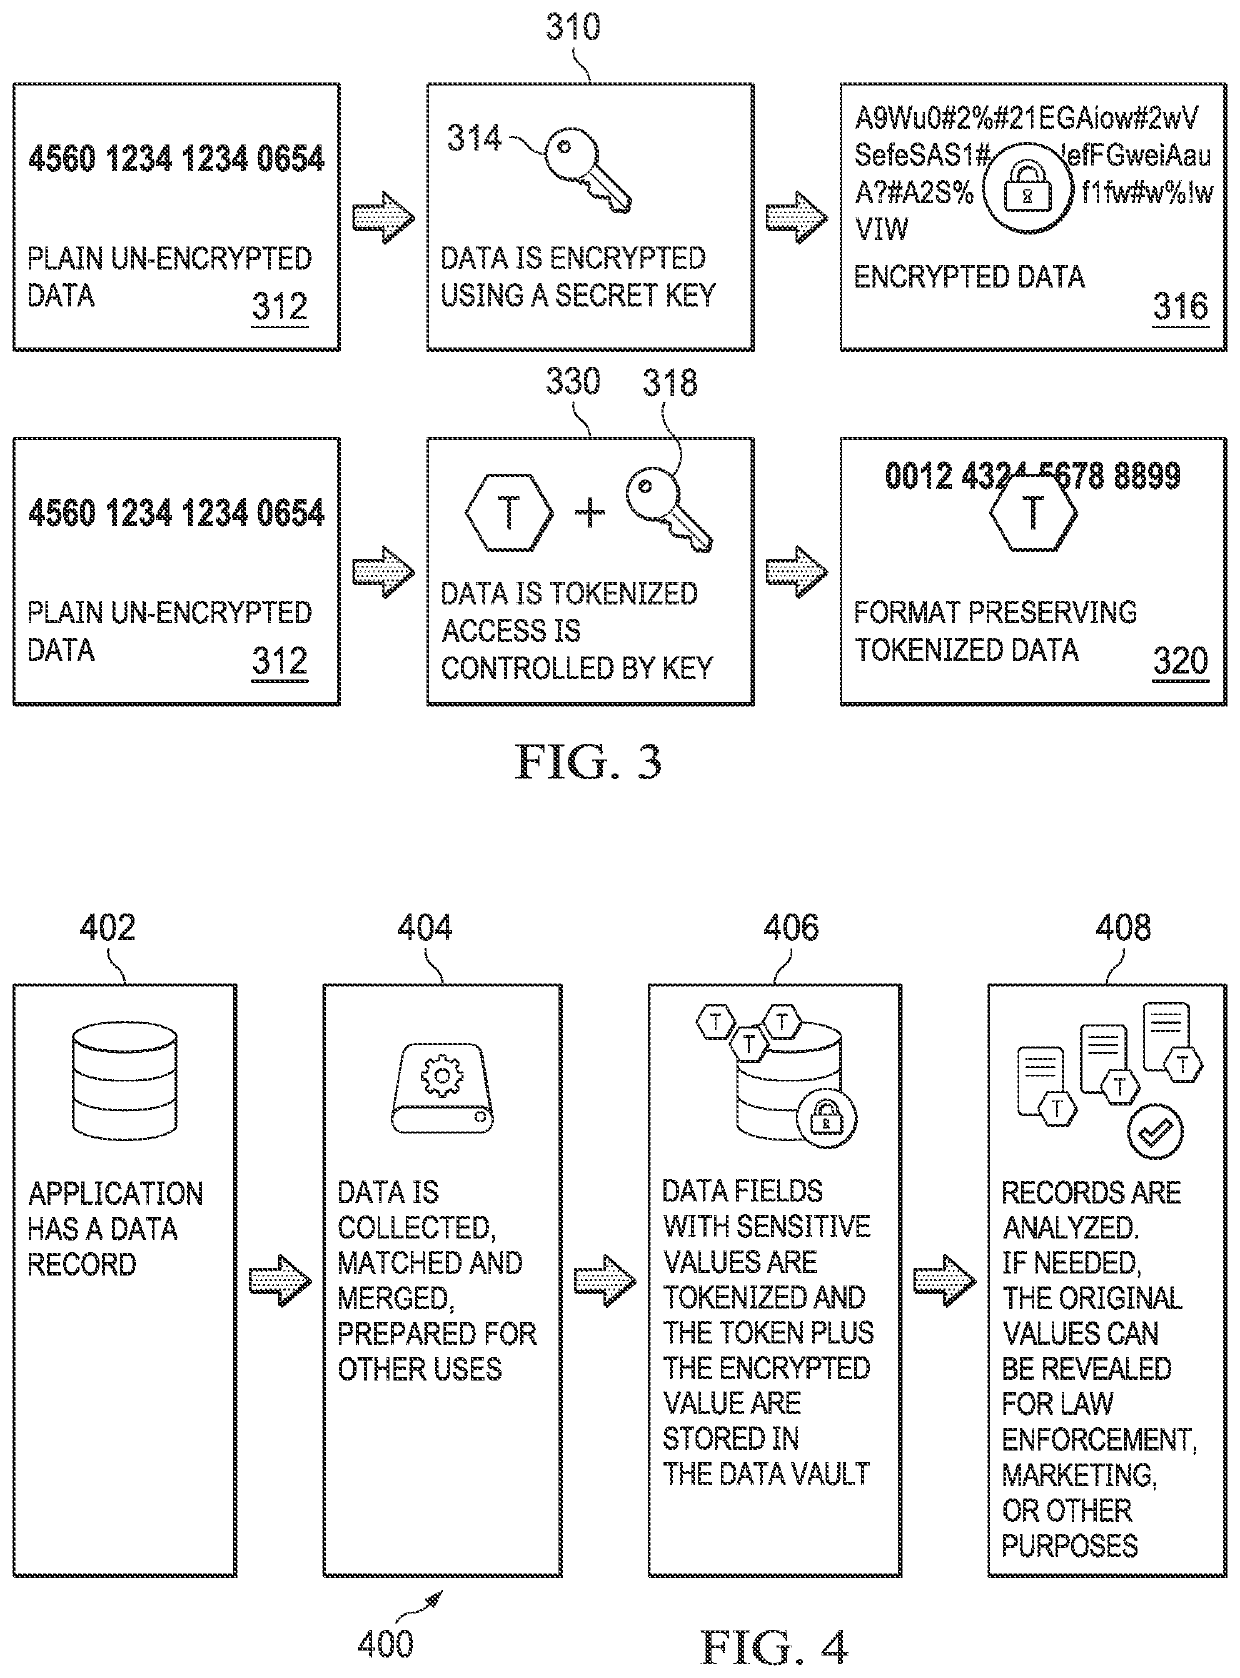 Token-based data security systems and methods with cross-referencing tokens in freeform text within structured document